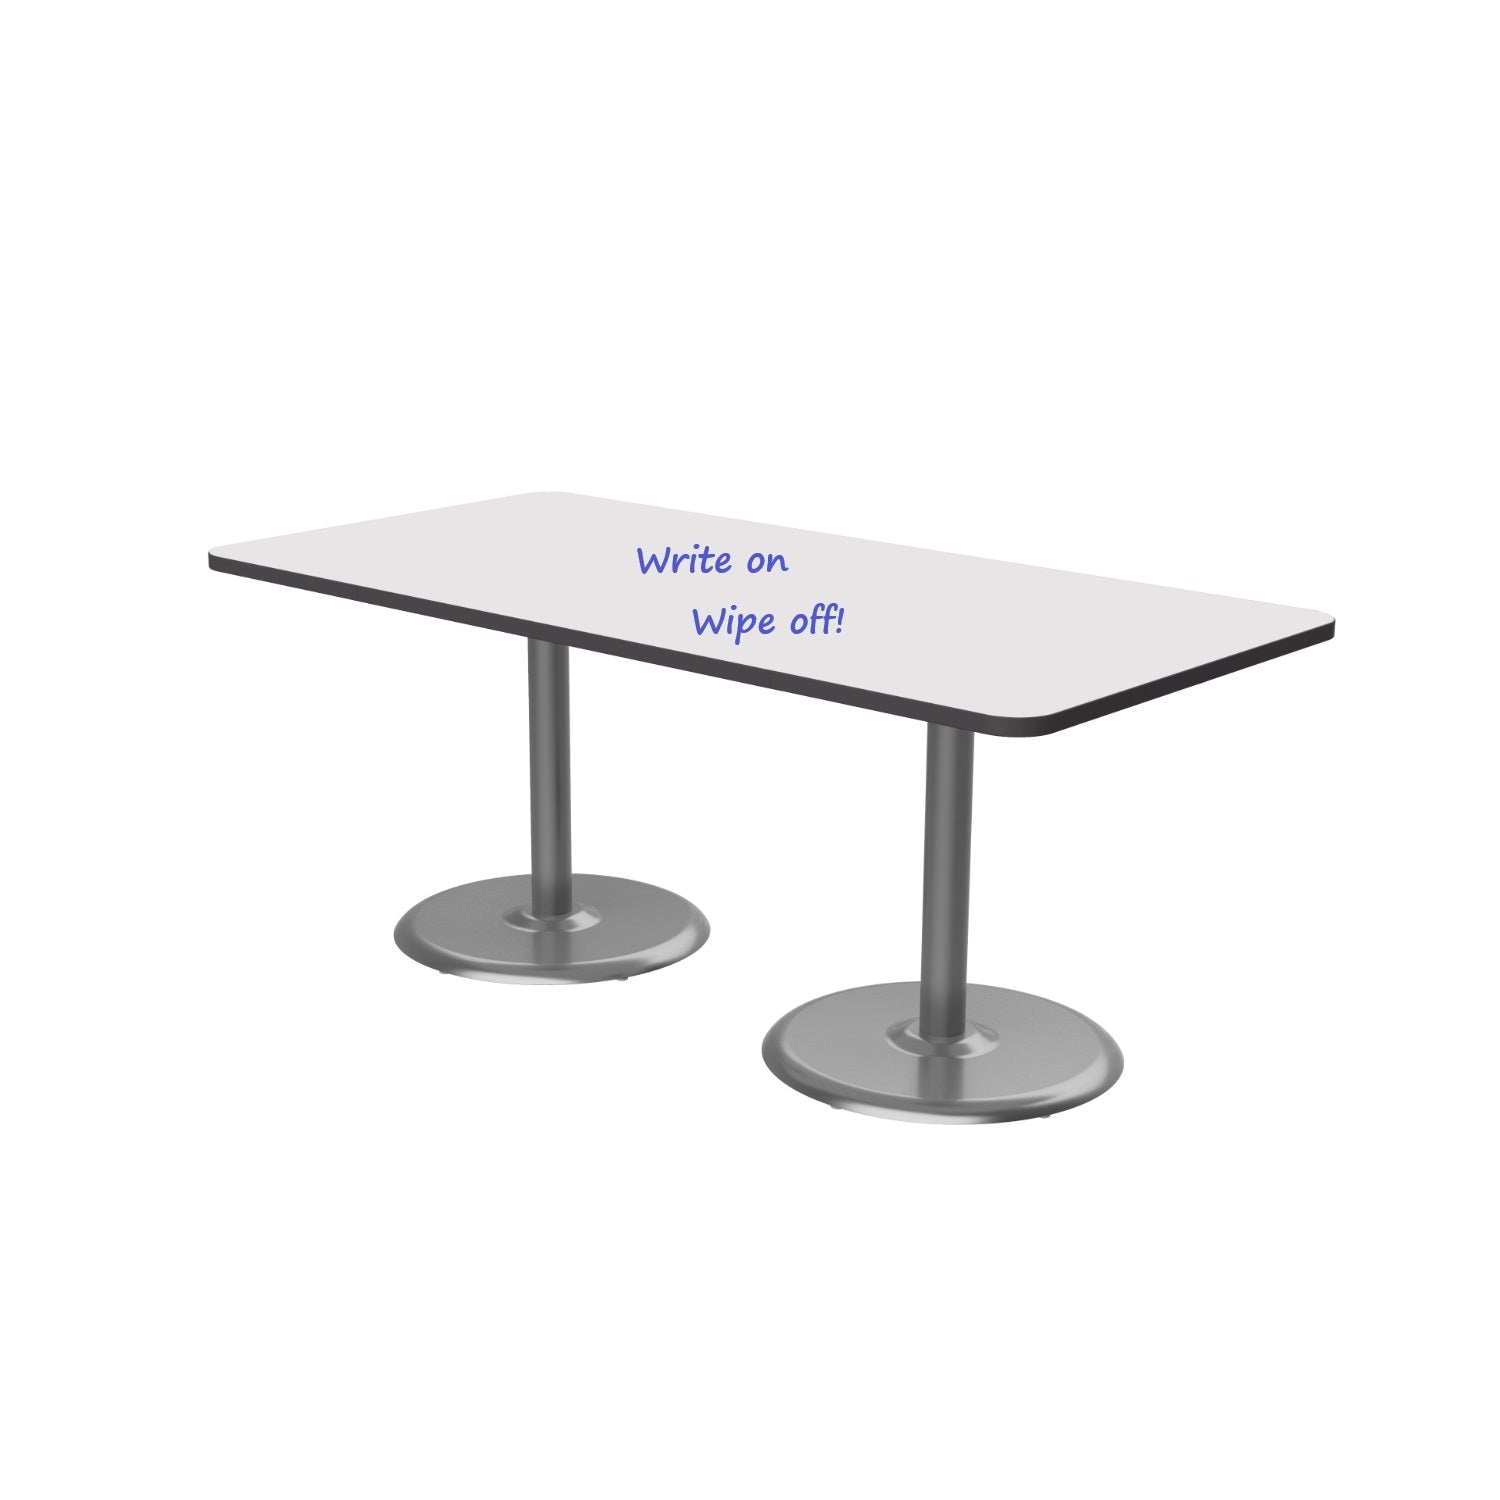 Dual Base Sitting Height 36" x 72" Rectangle Cafe Table with Dry-Erase Whiteboard Top